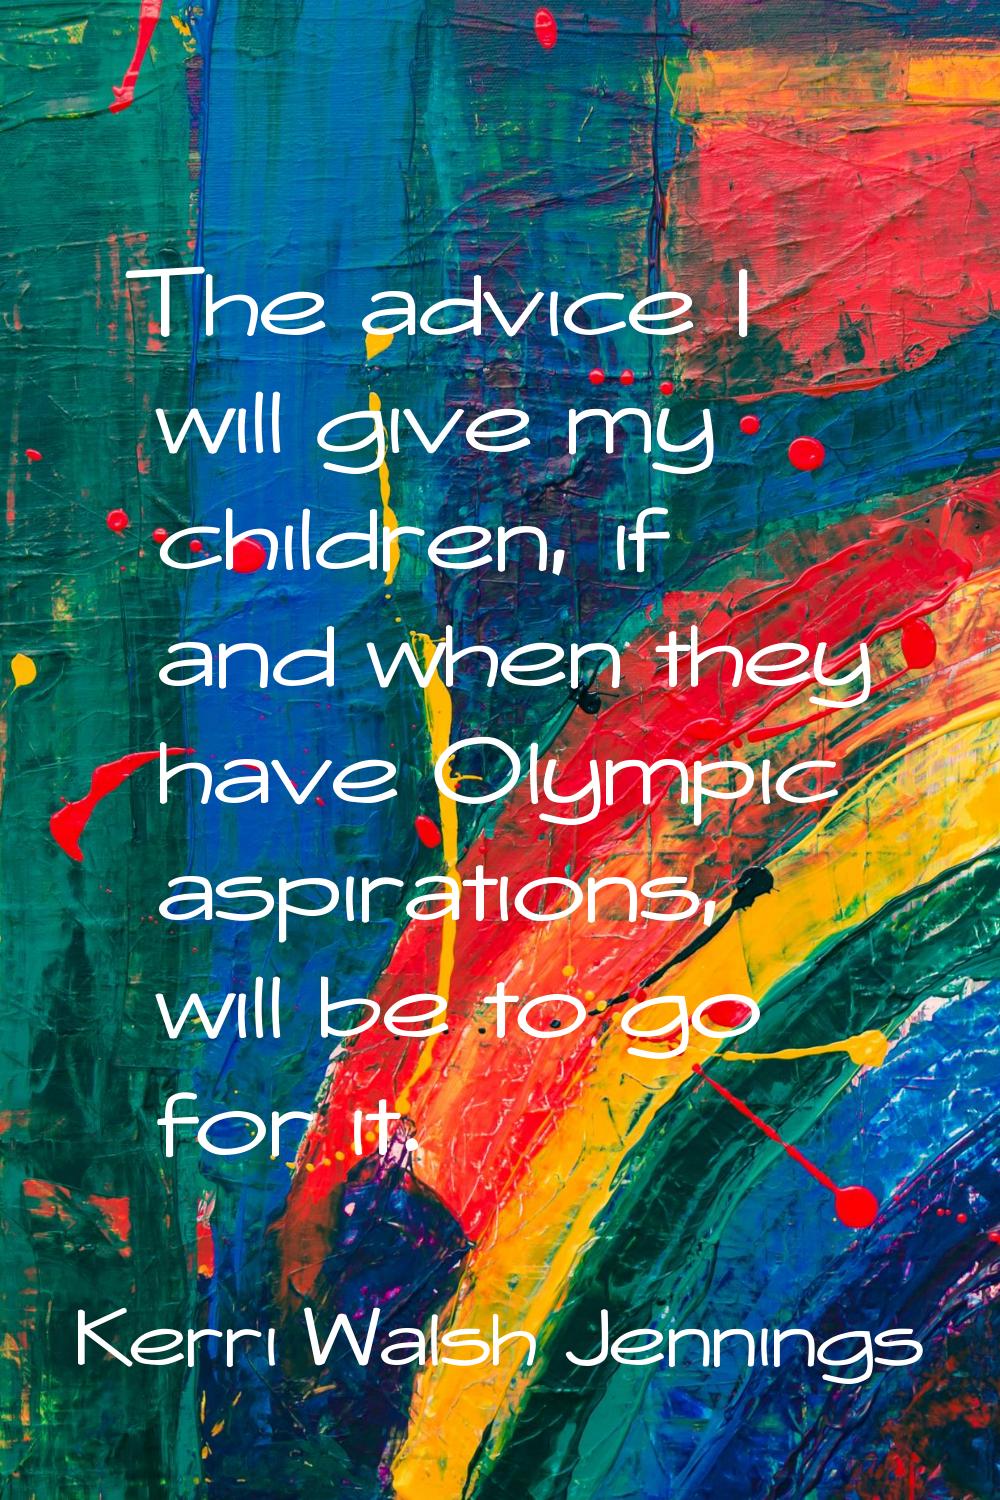 The advice I will give my children, if and when they have Olympic aspirations, will be to go for it